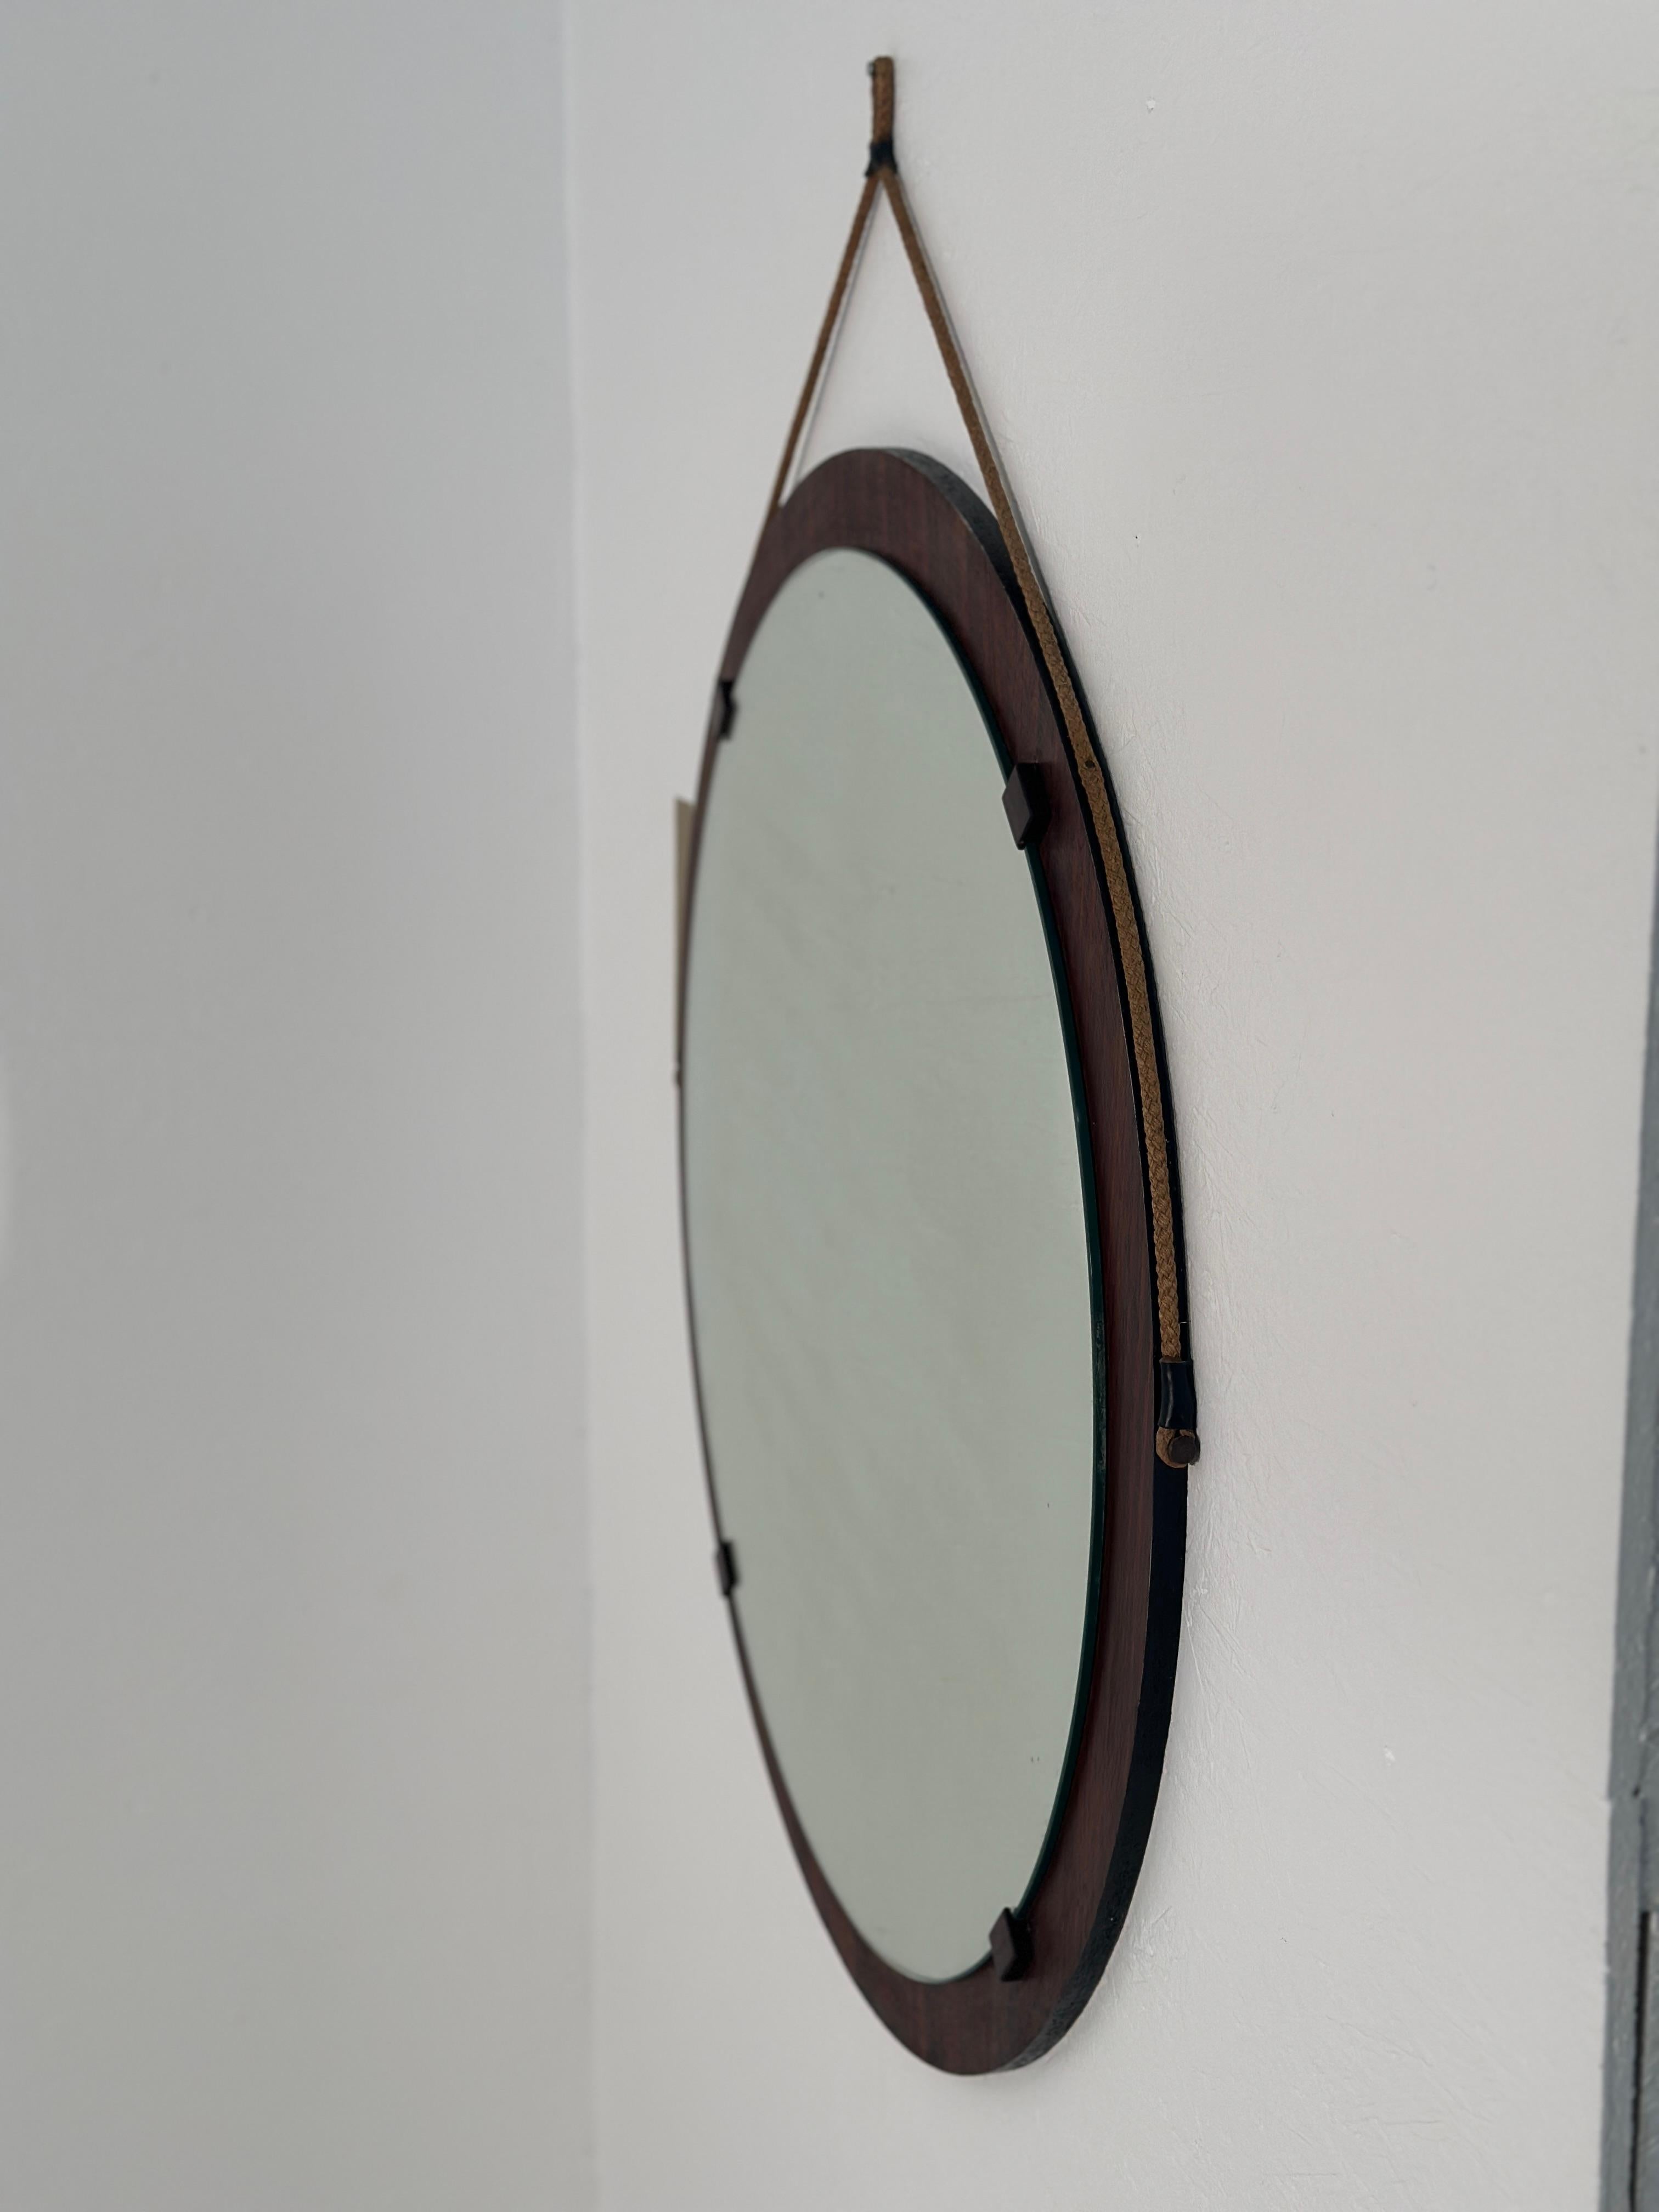 The Vintage Italian Wood Round Wall Mirror from the 1980s is a charming piece featuring a circular design with a wooden frame, epitomizing the rustic elegance of Italian craftsmanship from that era.

